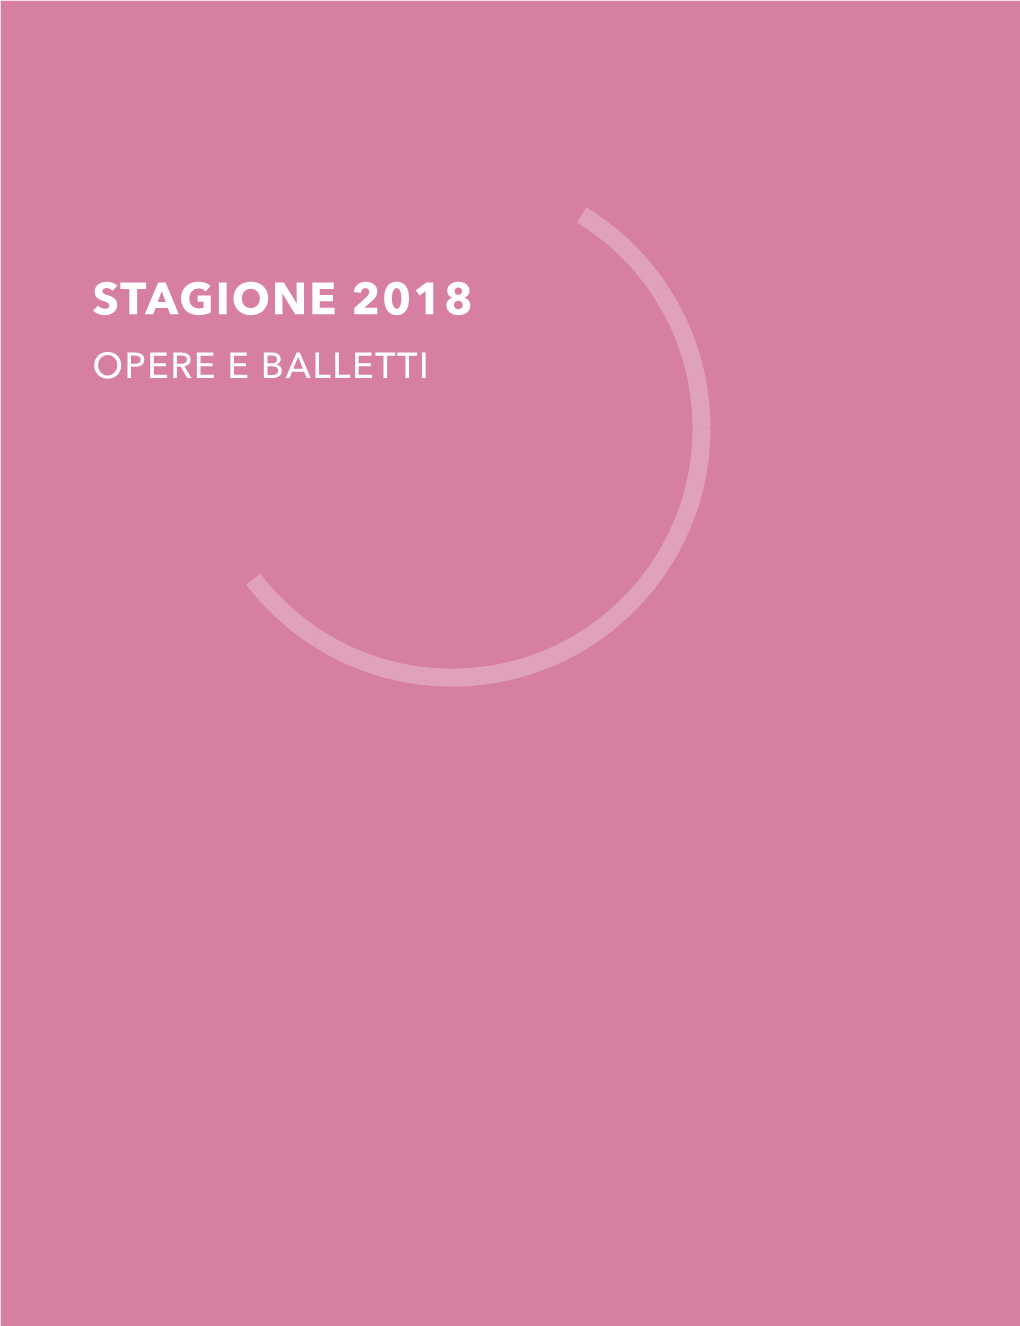 Stagione 2018